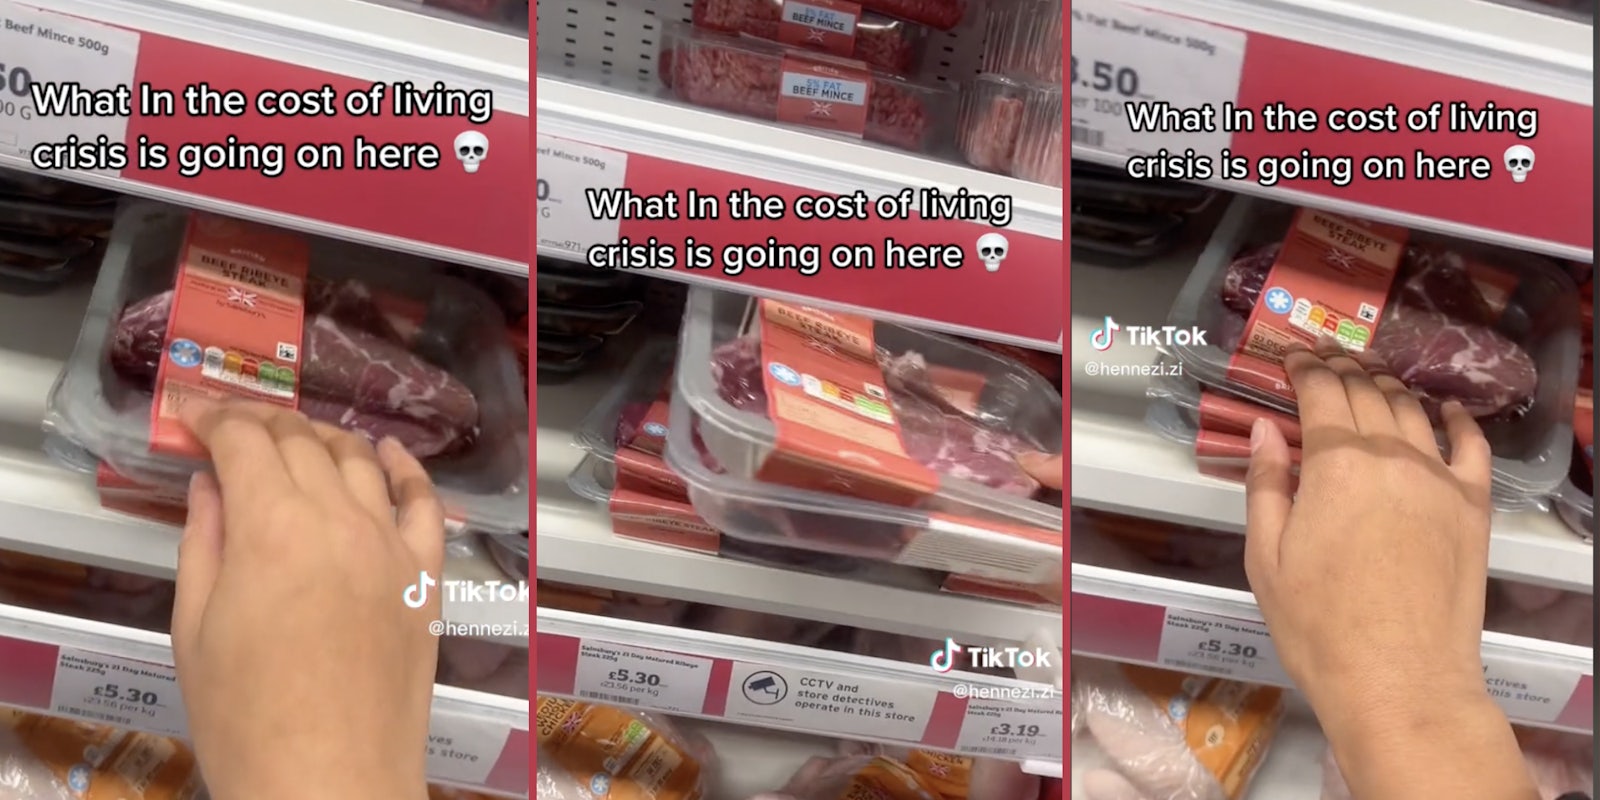 A Sainsbury's customer reaches out to touch a package of meat, claims an alarm sounds each time she touches it.